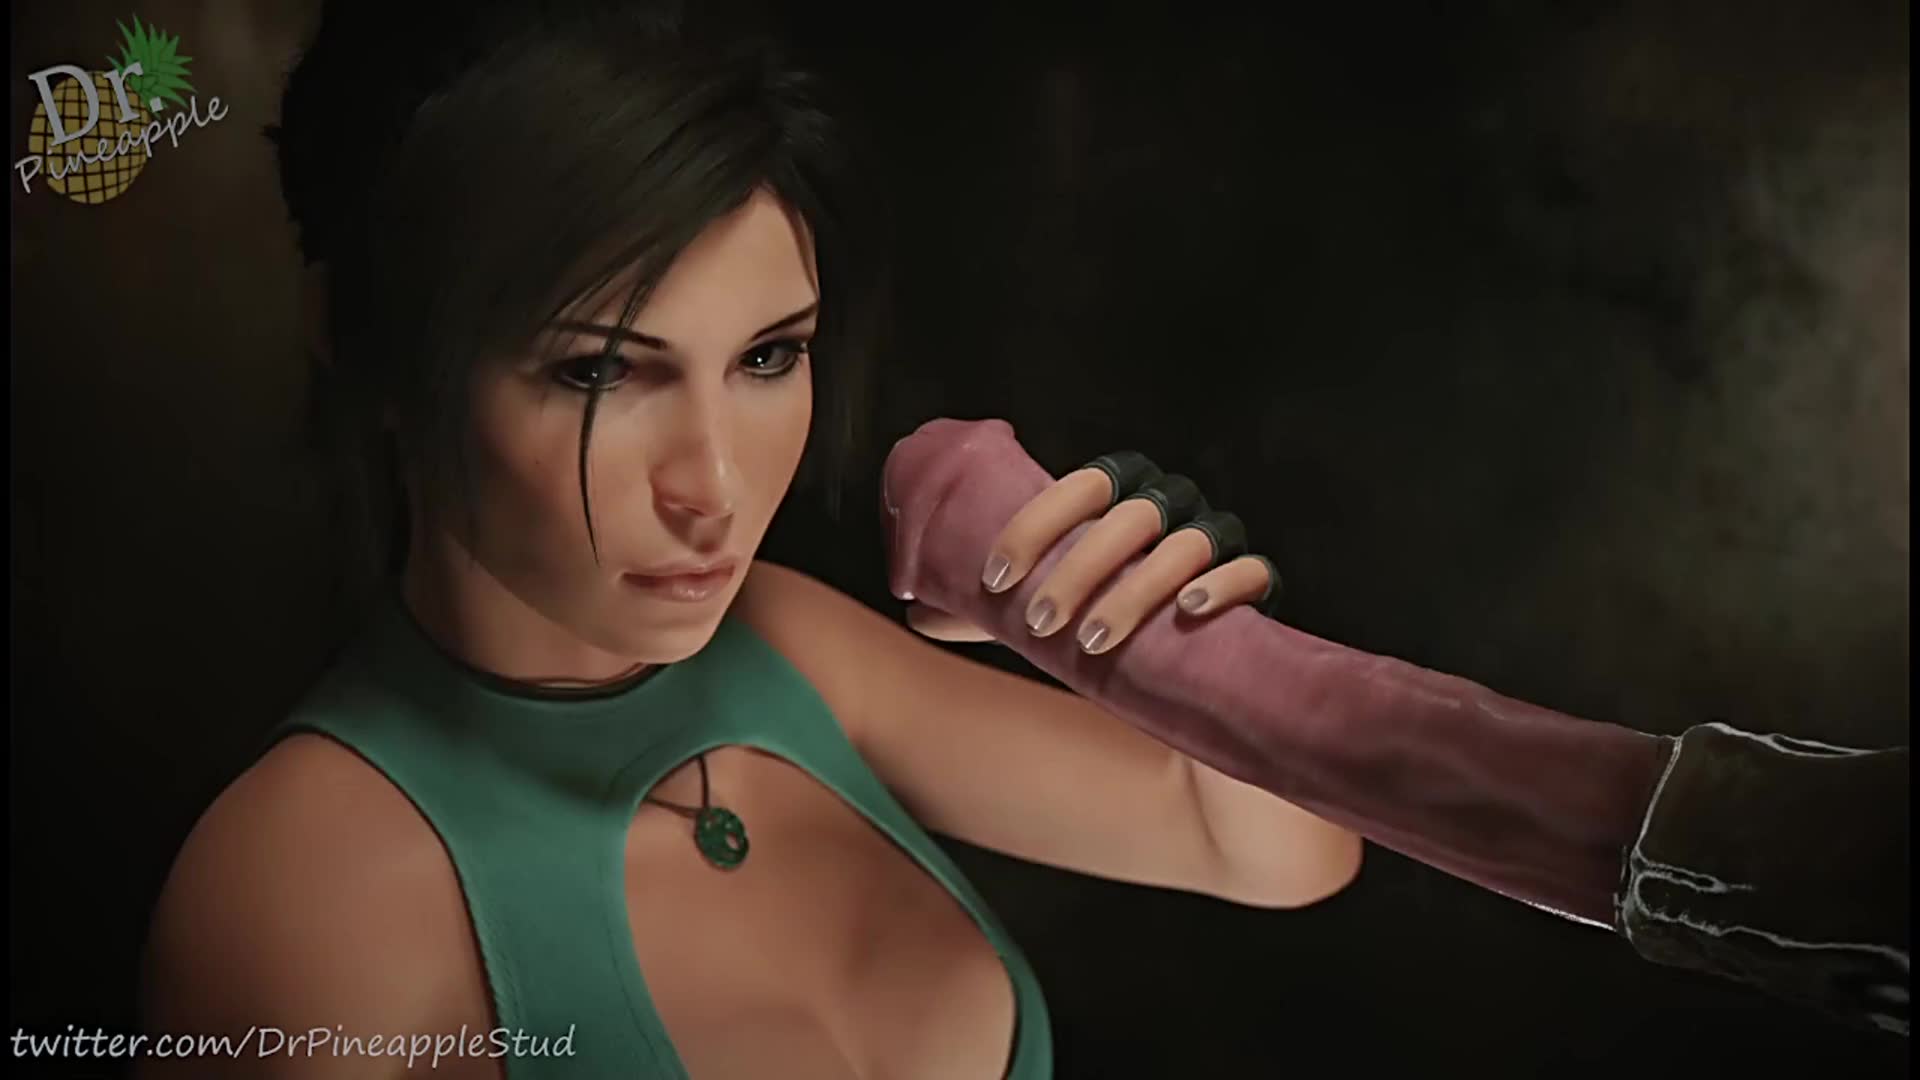 Jill Valentine Gives Deepthroat Blowjob To Huge Horse Cock – Resident Evil 3 NSFW animation thumbnail